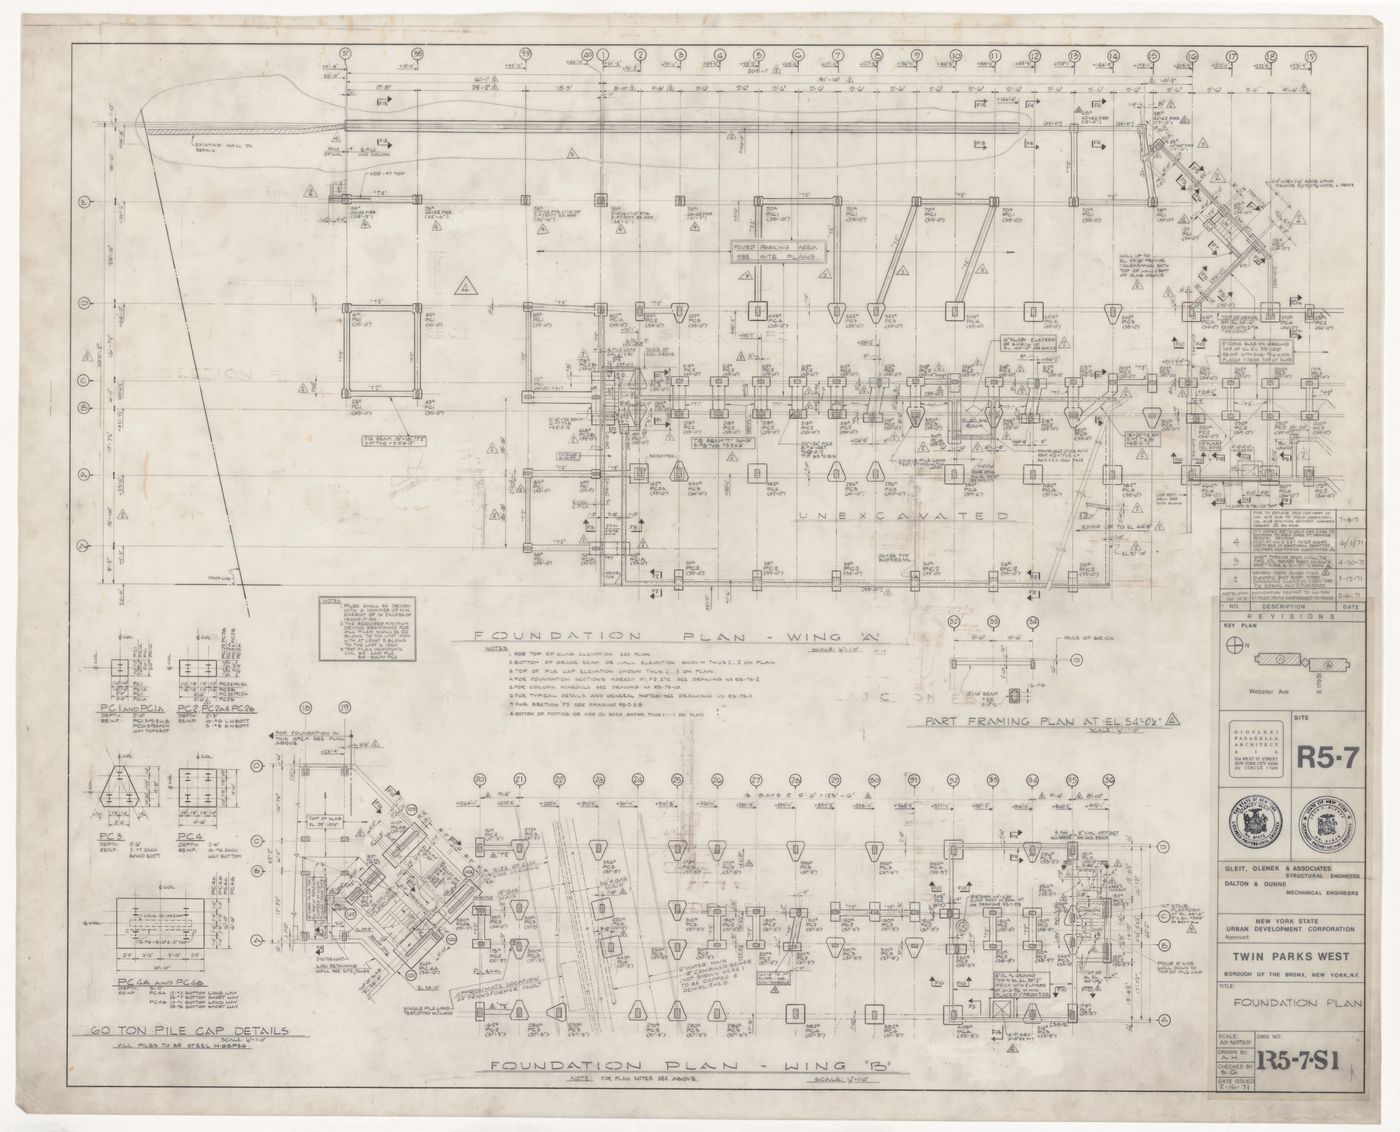 Foundation plans for Twin Parks West, Site R5-7, Bronx, New York